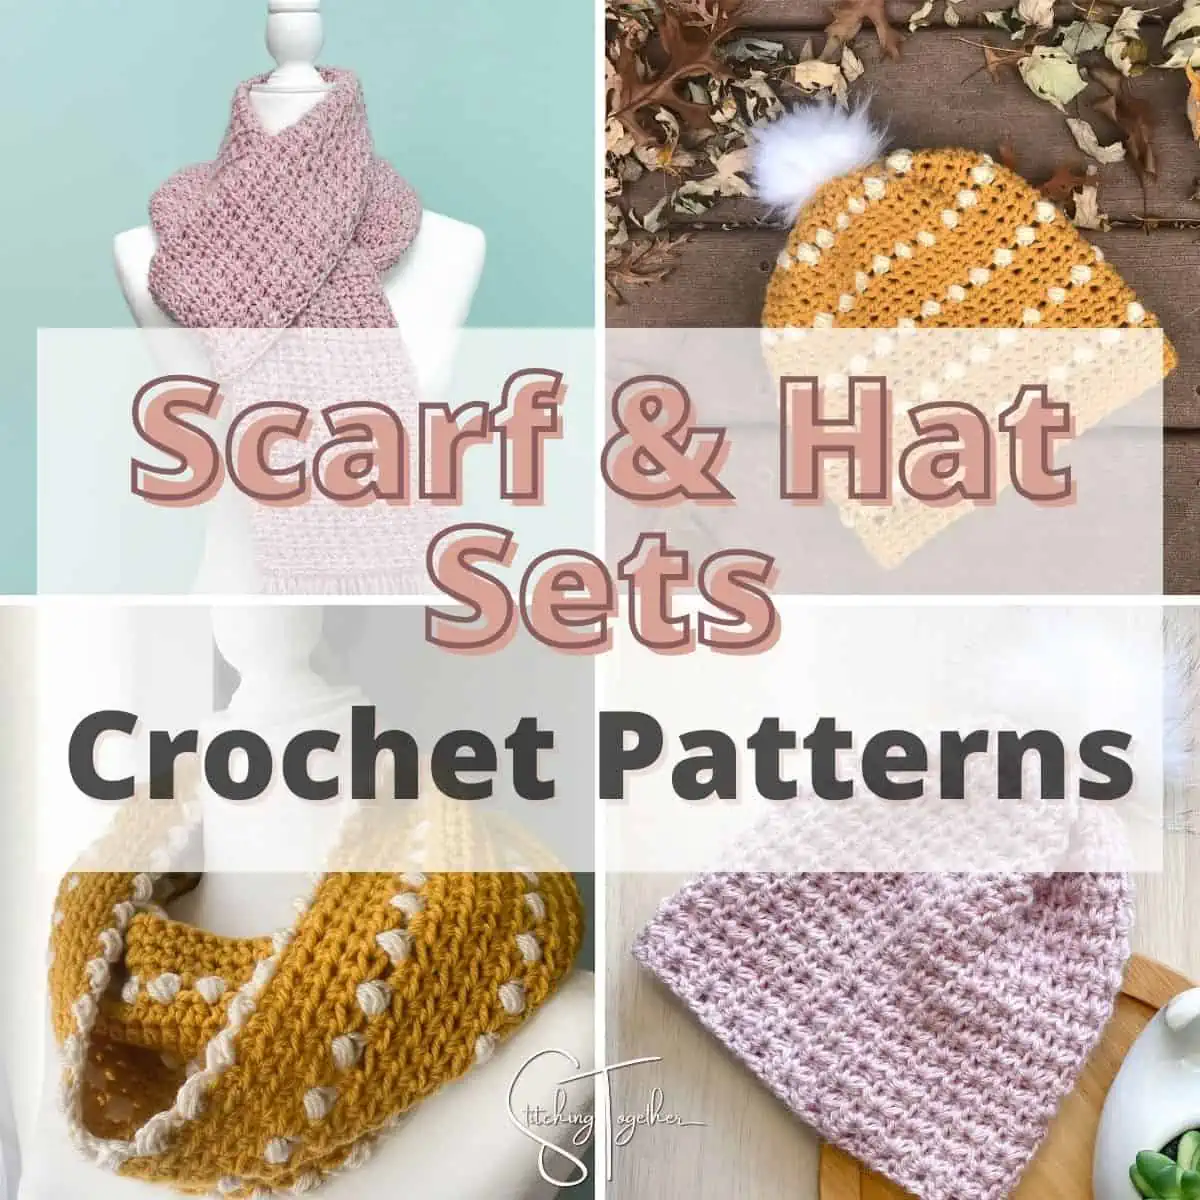 collage image with different crochet hat and scarves with text overlay reading "scarf & hat sets crochet patterns"